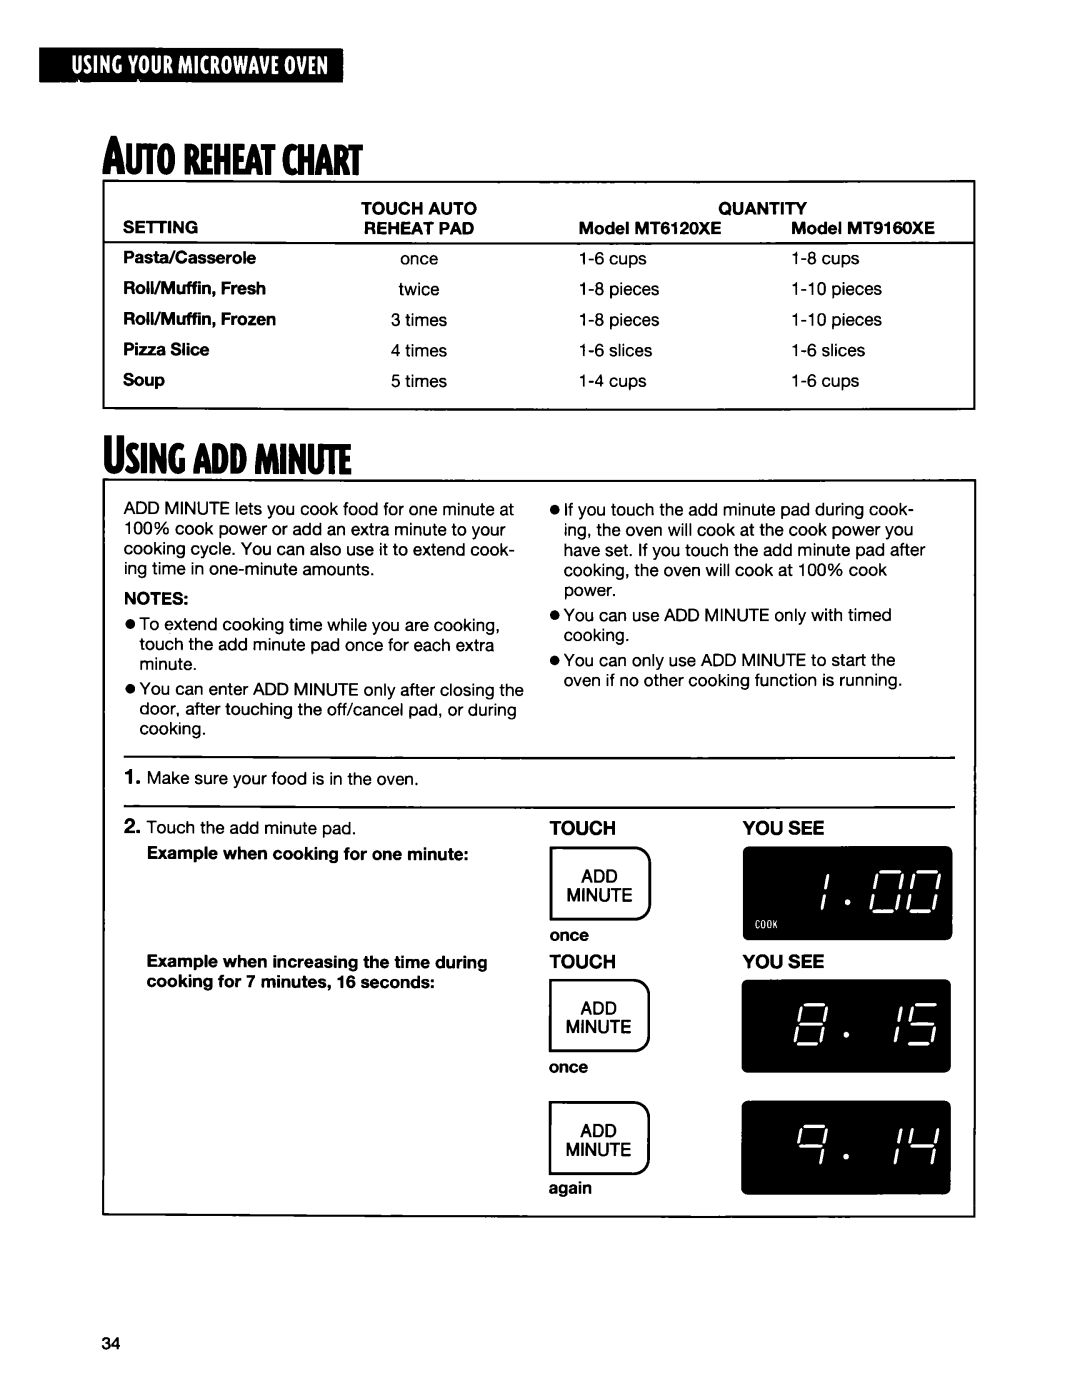 Whirlpool MT9160XE, MT6120XE installation instructions Autoreheatchart, Usingaddminute, Touch, You See 